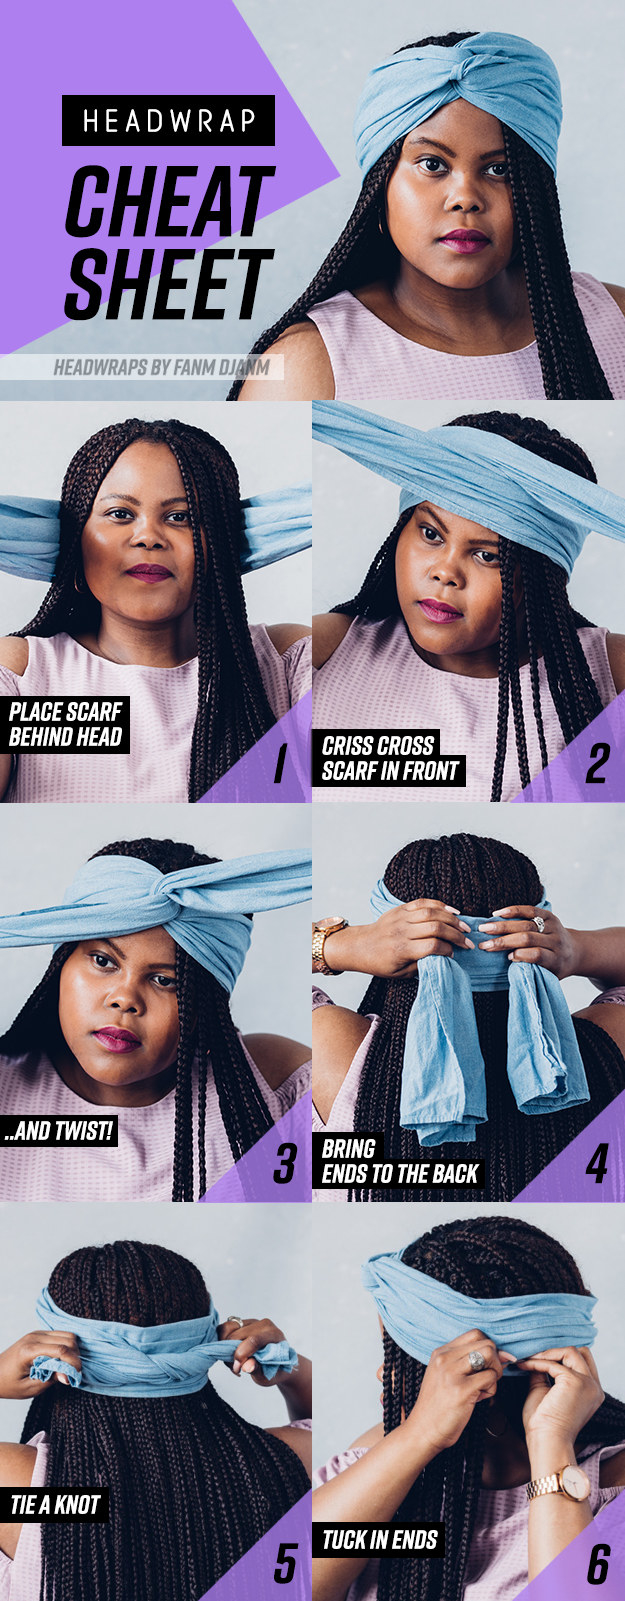 The reimagined headband is also a winner. Remember this the next time you start taking out your braids at 10 P.M. knowing good and well you've got work in the morning.